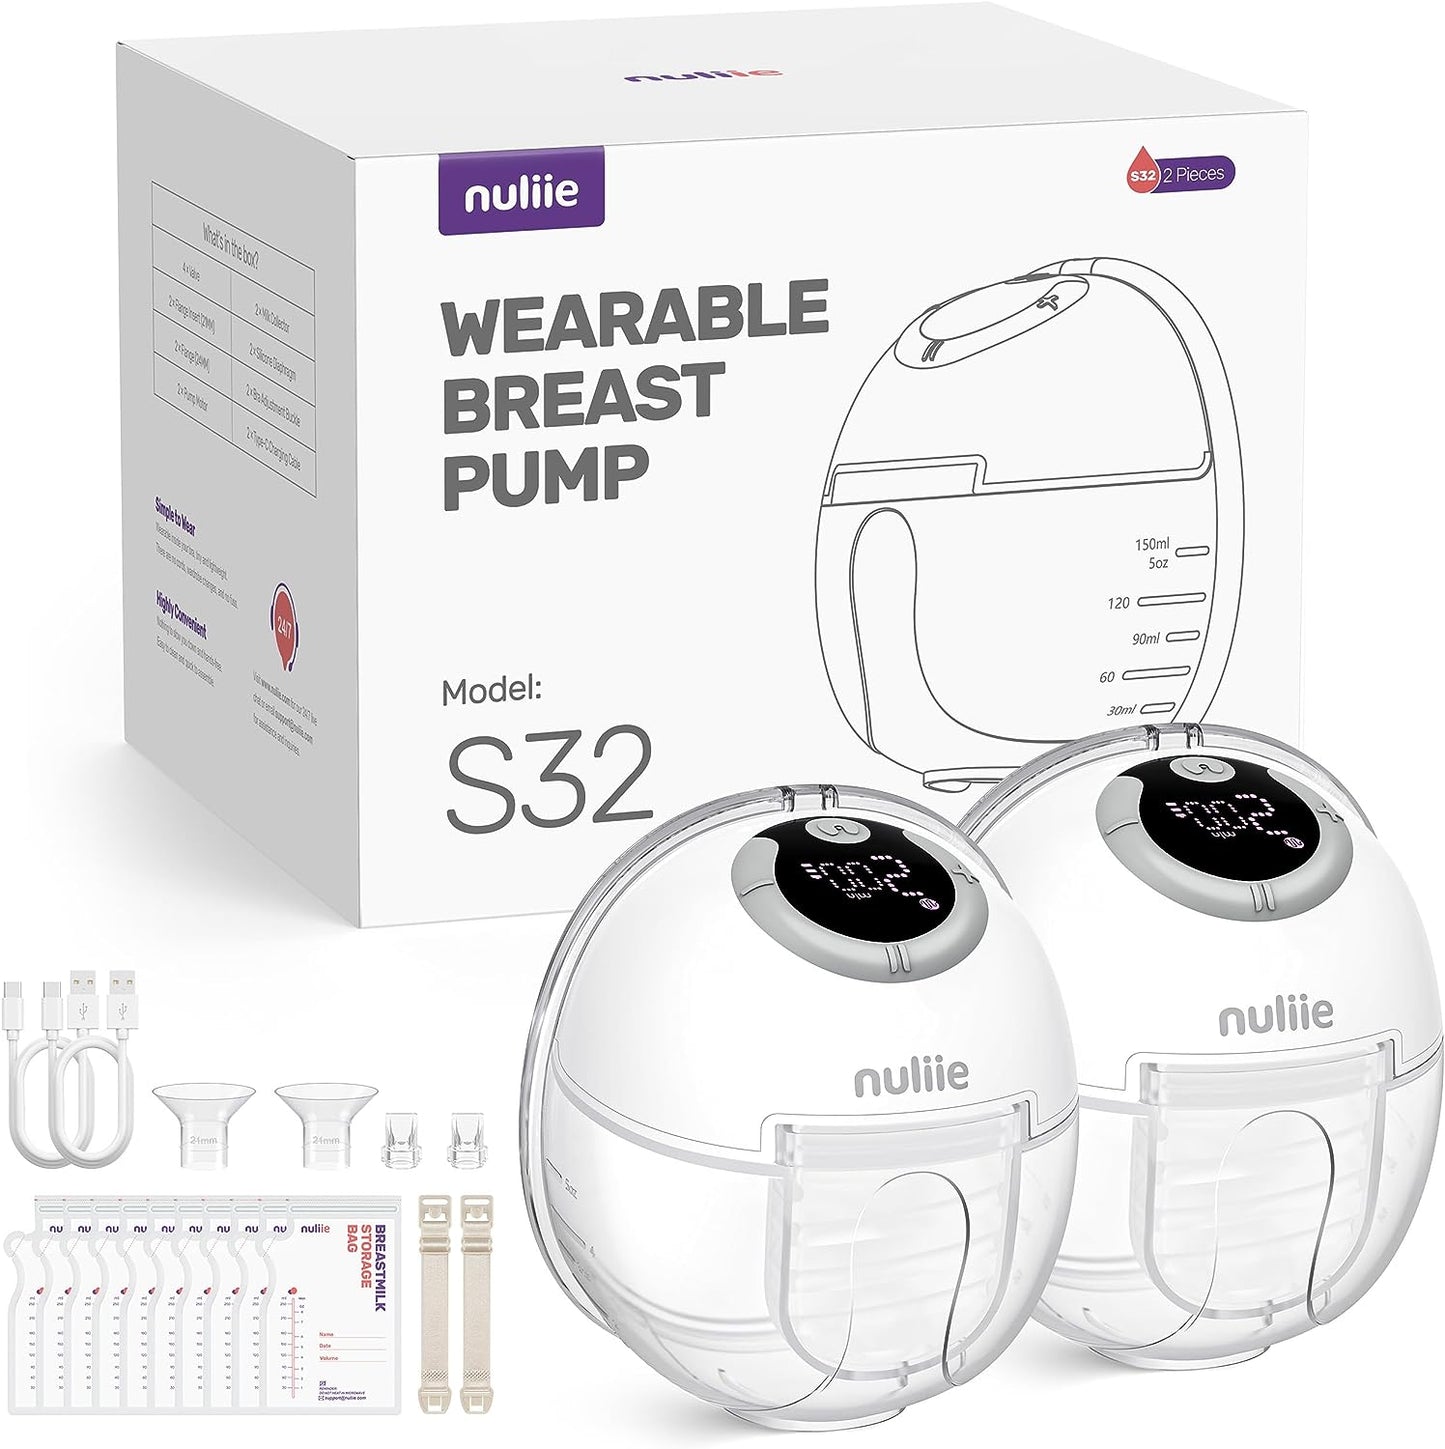 Nuliie Electric Portable S32 Breast Pump, 4 Modes, 9 Levels, 24 mm Flange with LED Display, Additional 1 Flange 18 mm & 21 mm and Interchangeable Duck Valves (2 Packs, White)